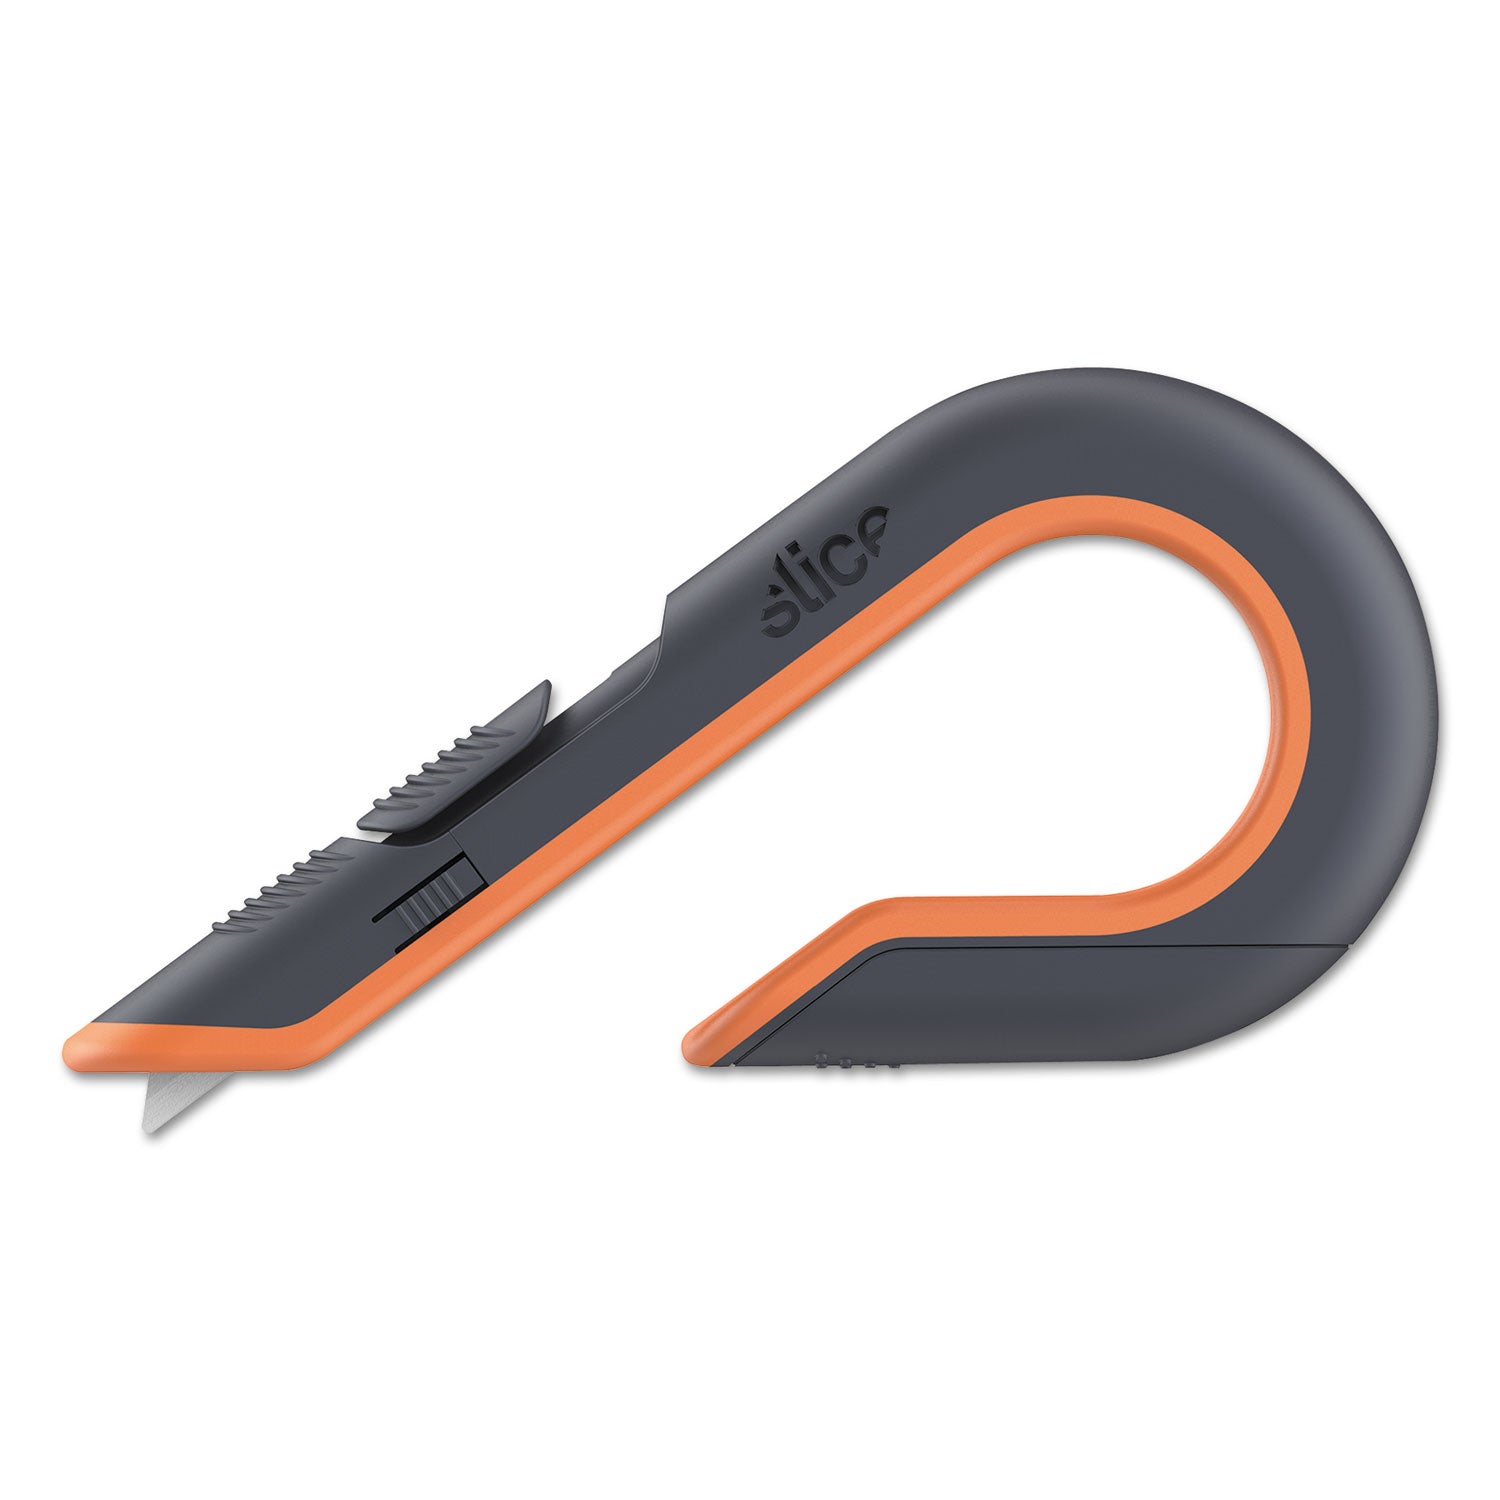 box-cutters-double-sided-replaceable-129-carbon-steel-blade-7-nylon-handle-gray-orange_sli10400 - 6